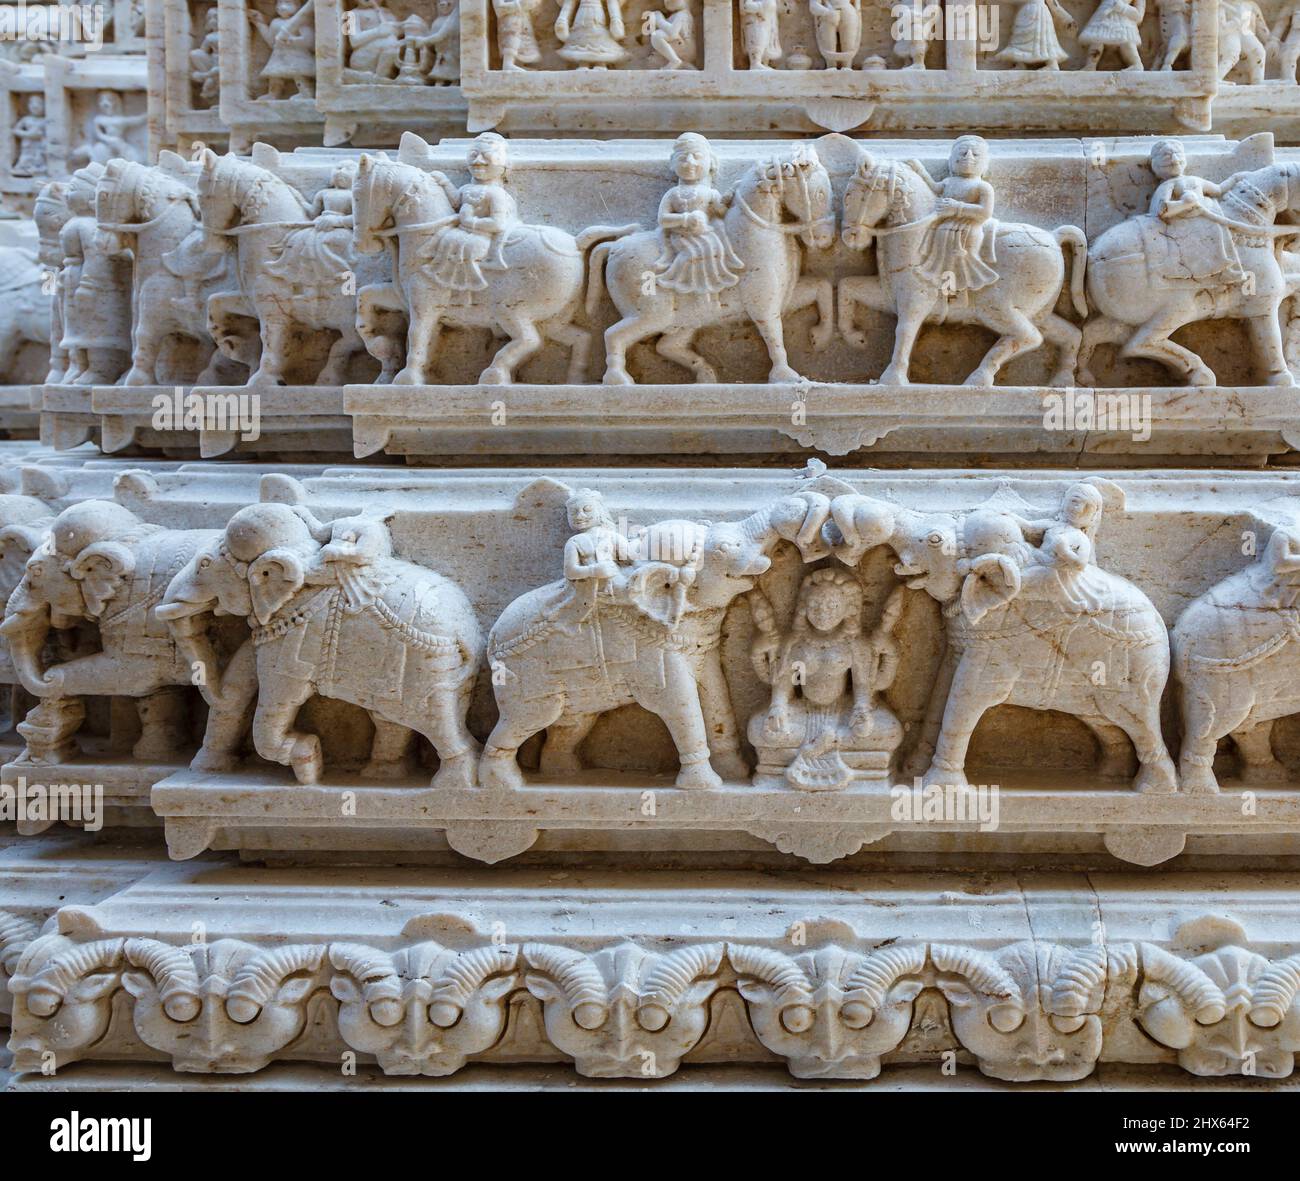 Sculptured frieze with horses and elephants at the Hindu Shree Jagat Sheromani Ji Temple, Udaipur, Indian state of Rajasthan, India Stock Photo